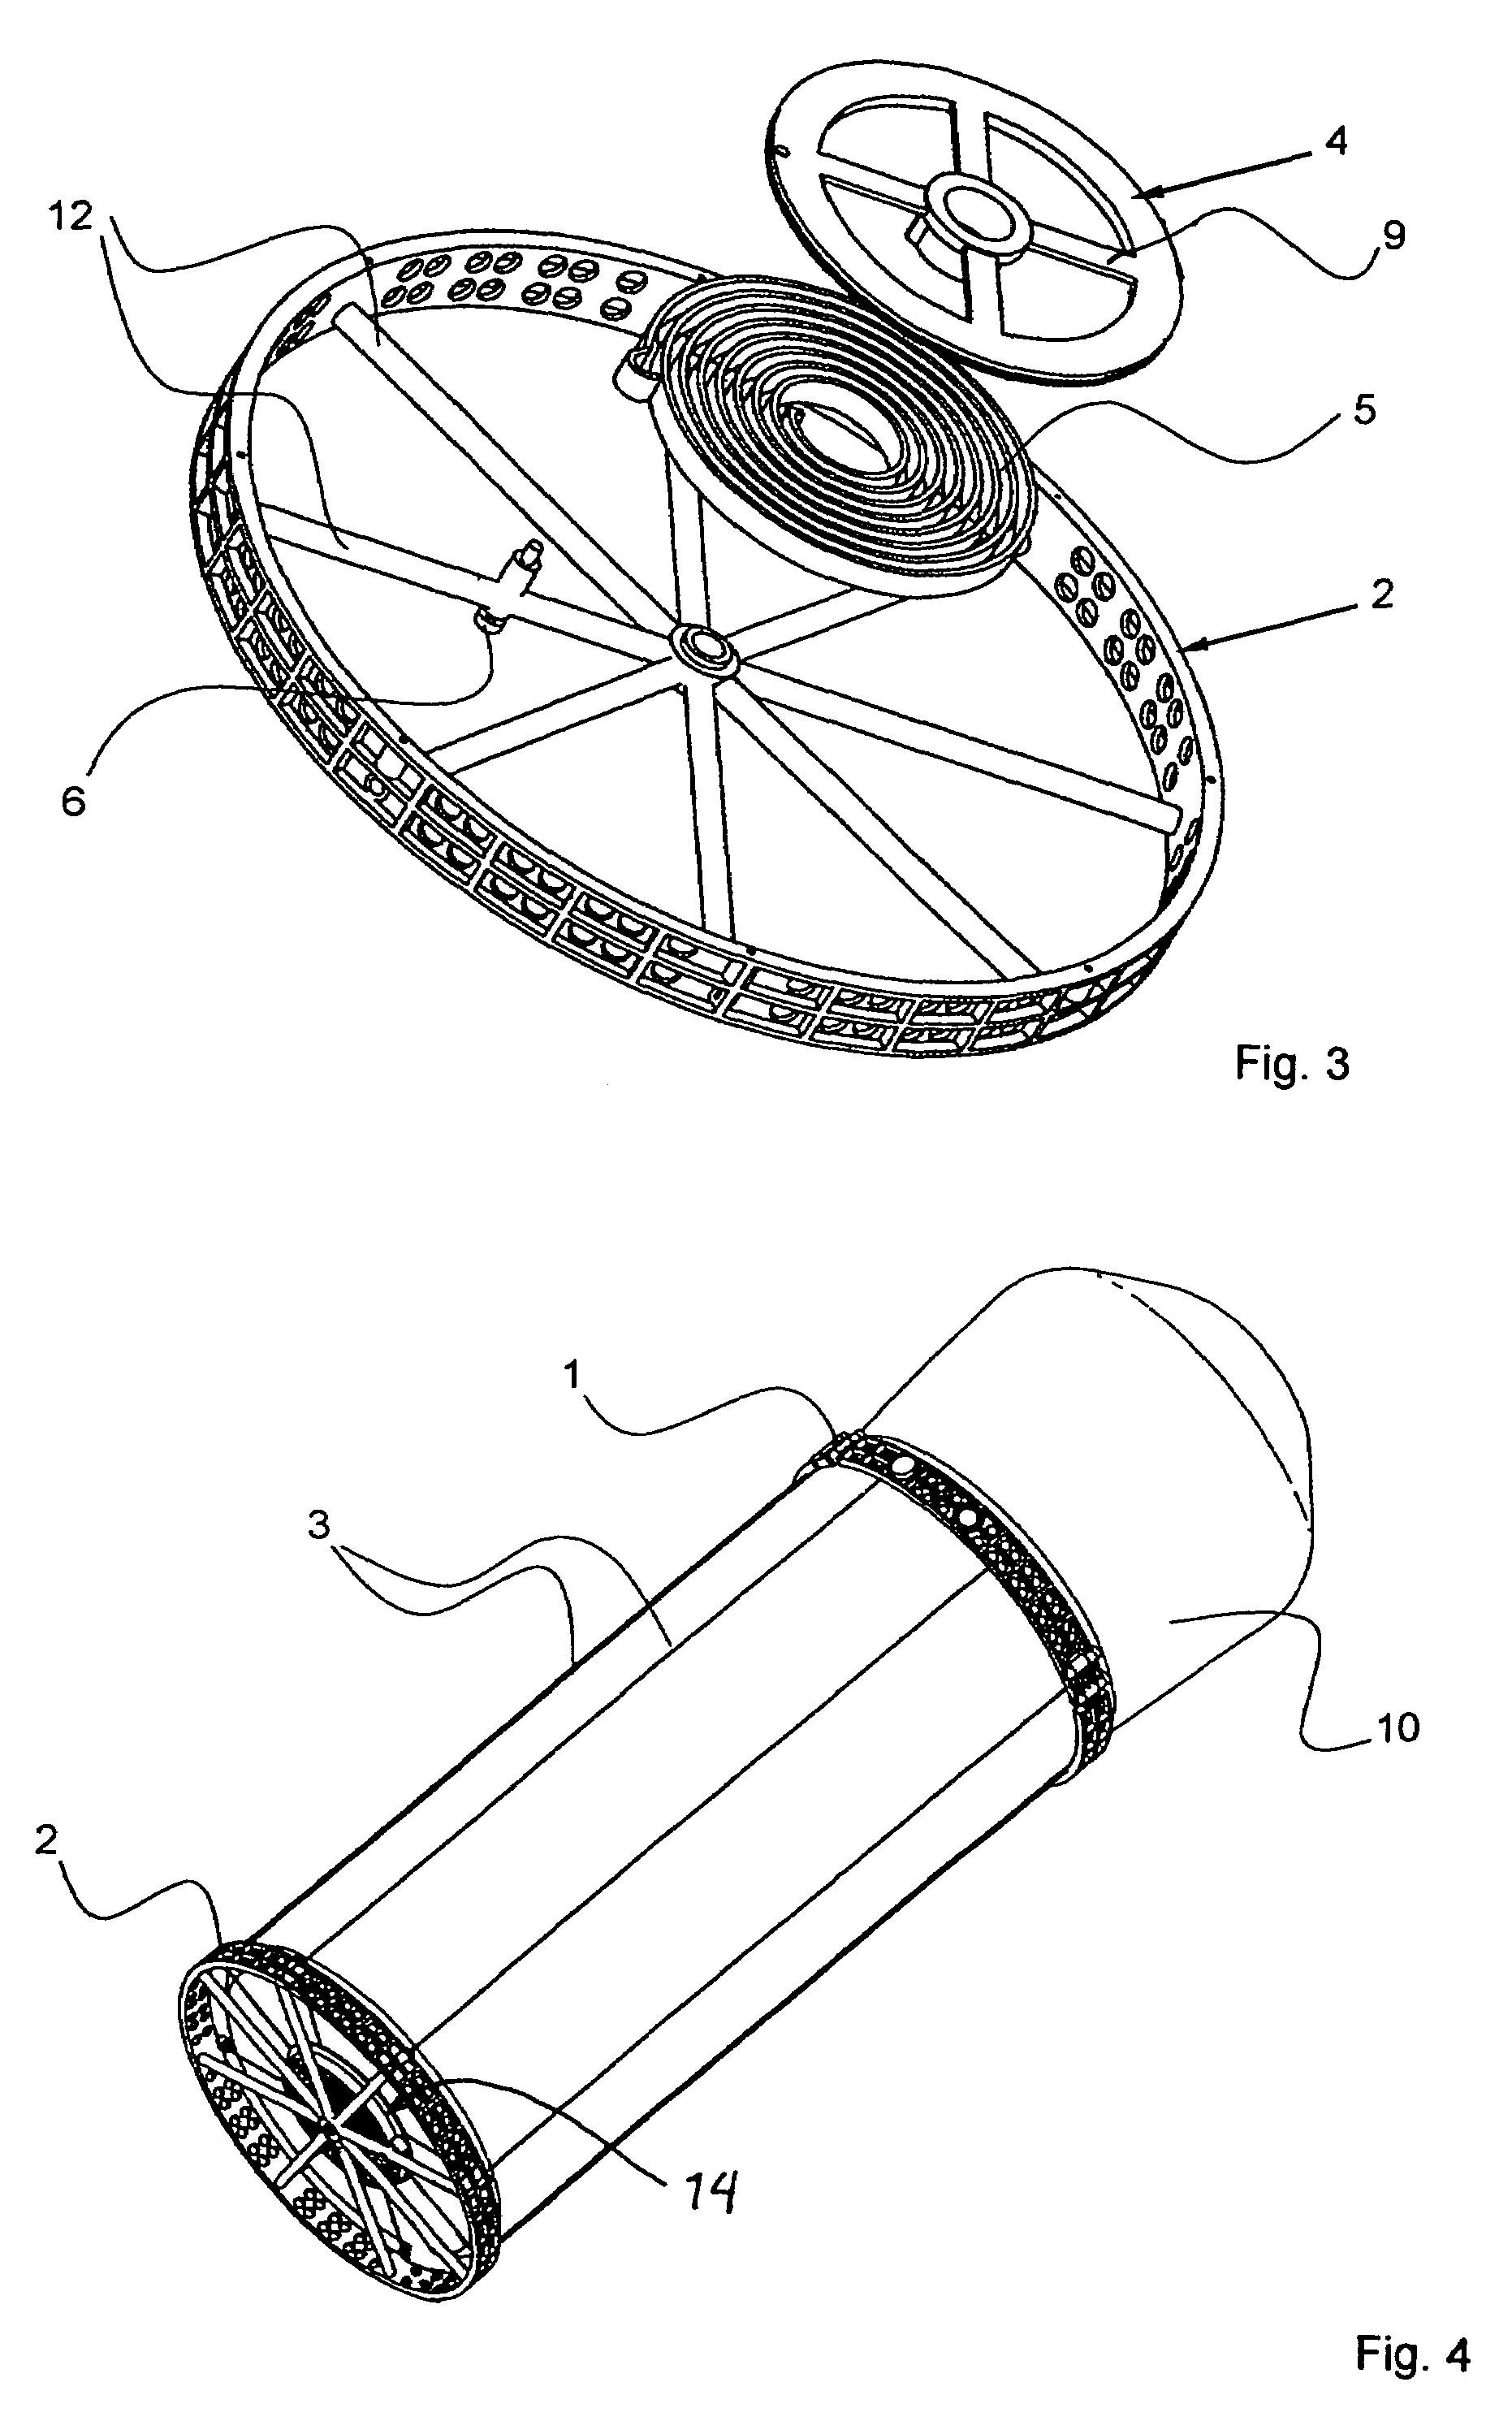 Apparatus with axis-parallel tension cables for ejecting a spin-stabilized body from a spacecraft